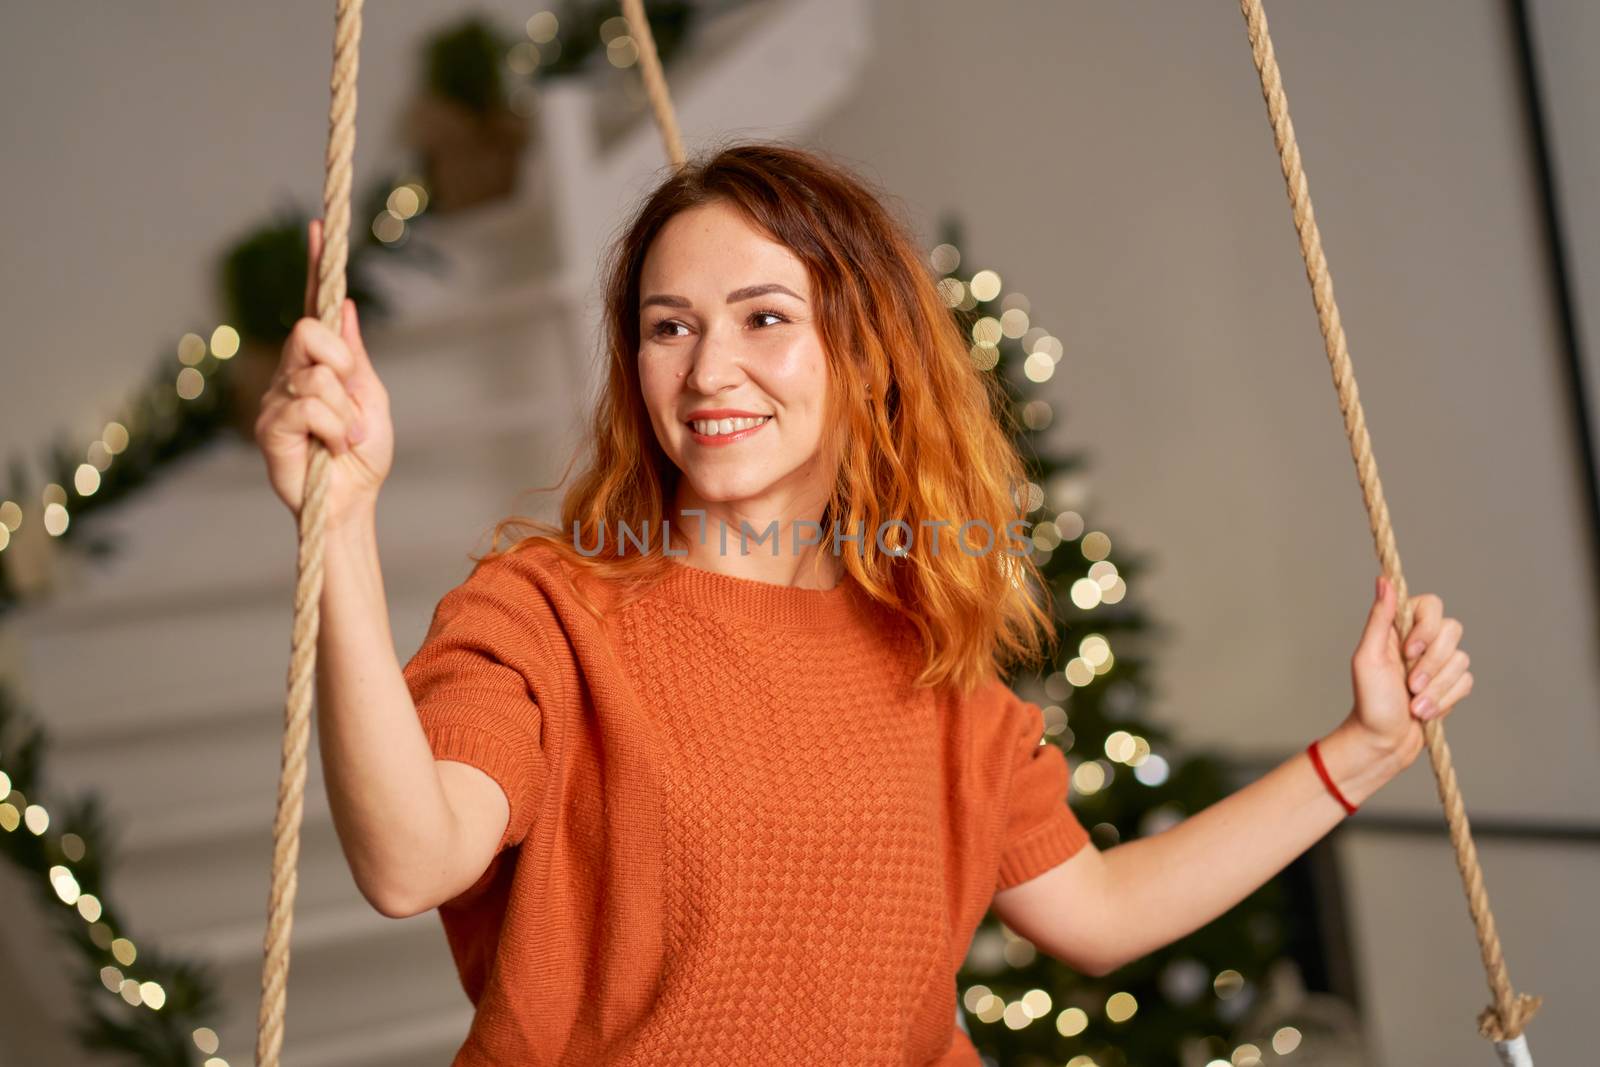 A beautiful redhead girl is swinging in her room on Christmas night.